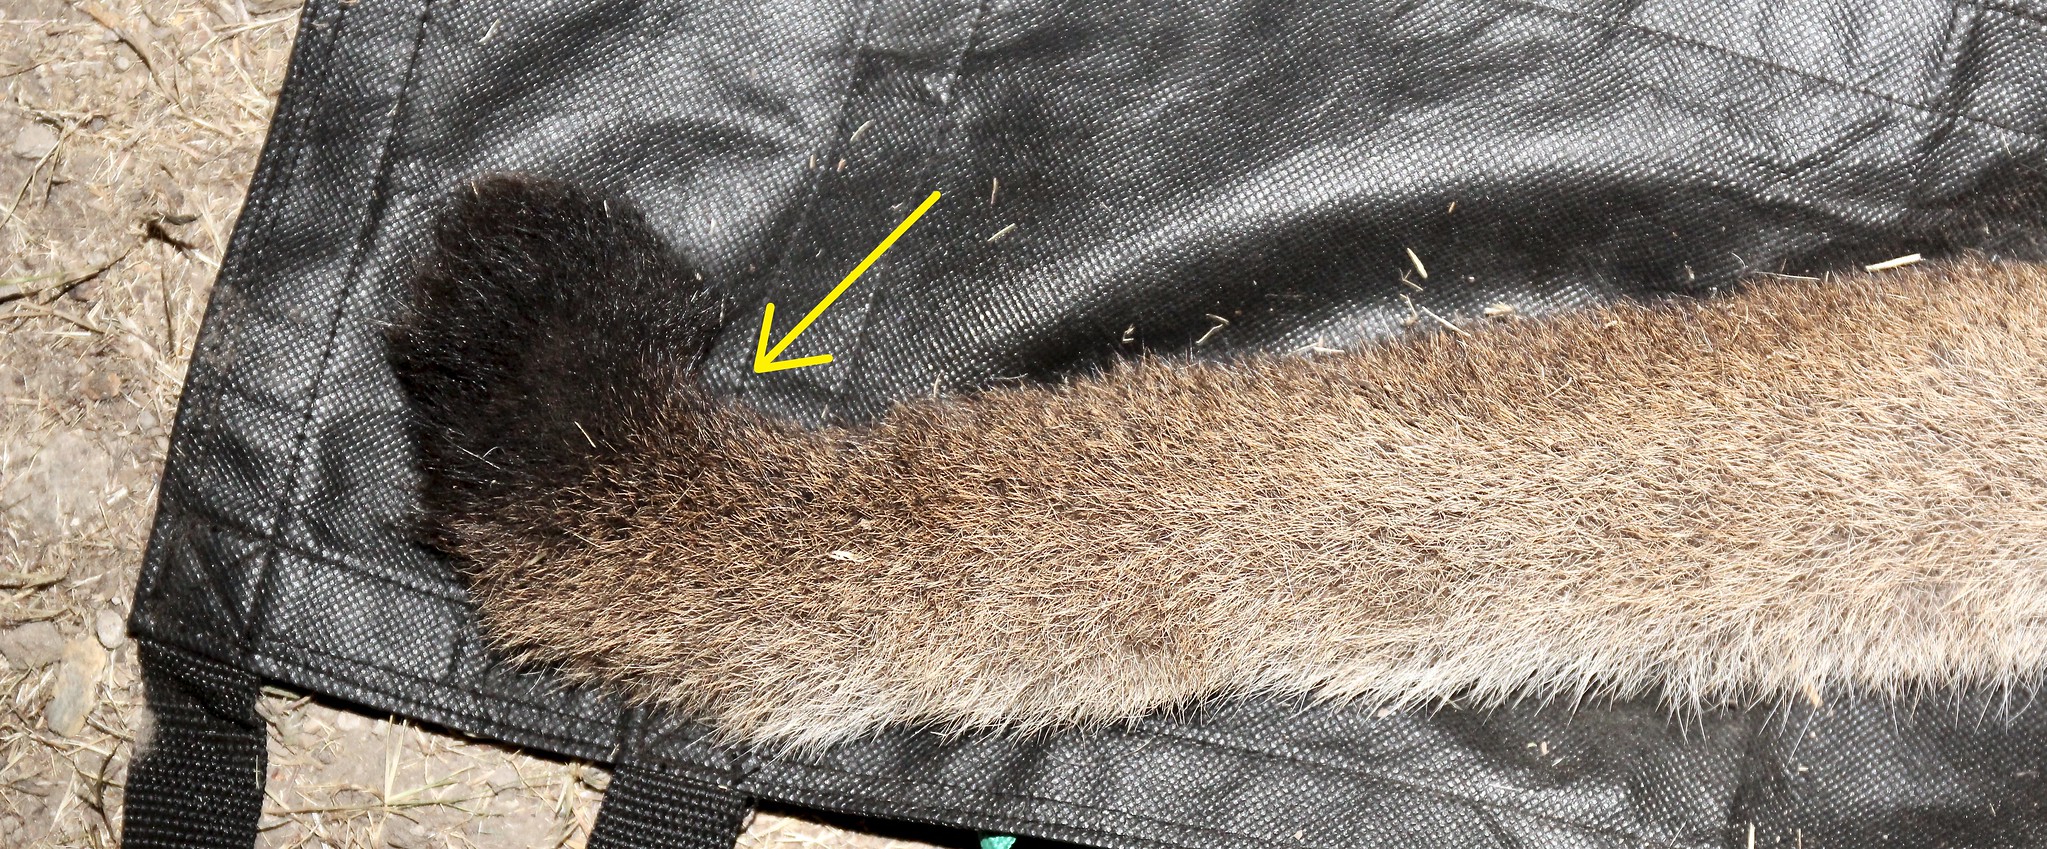 The kinked tail as seen on the juvenile cougar P-81.  (Image: National Park Service)